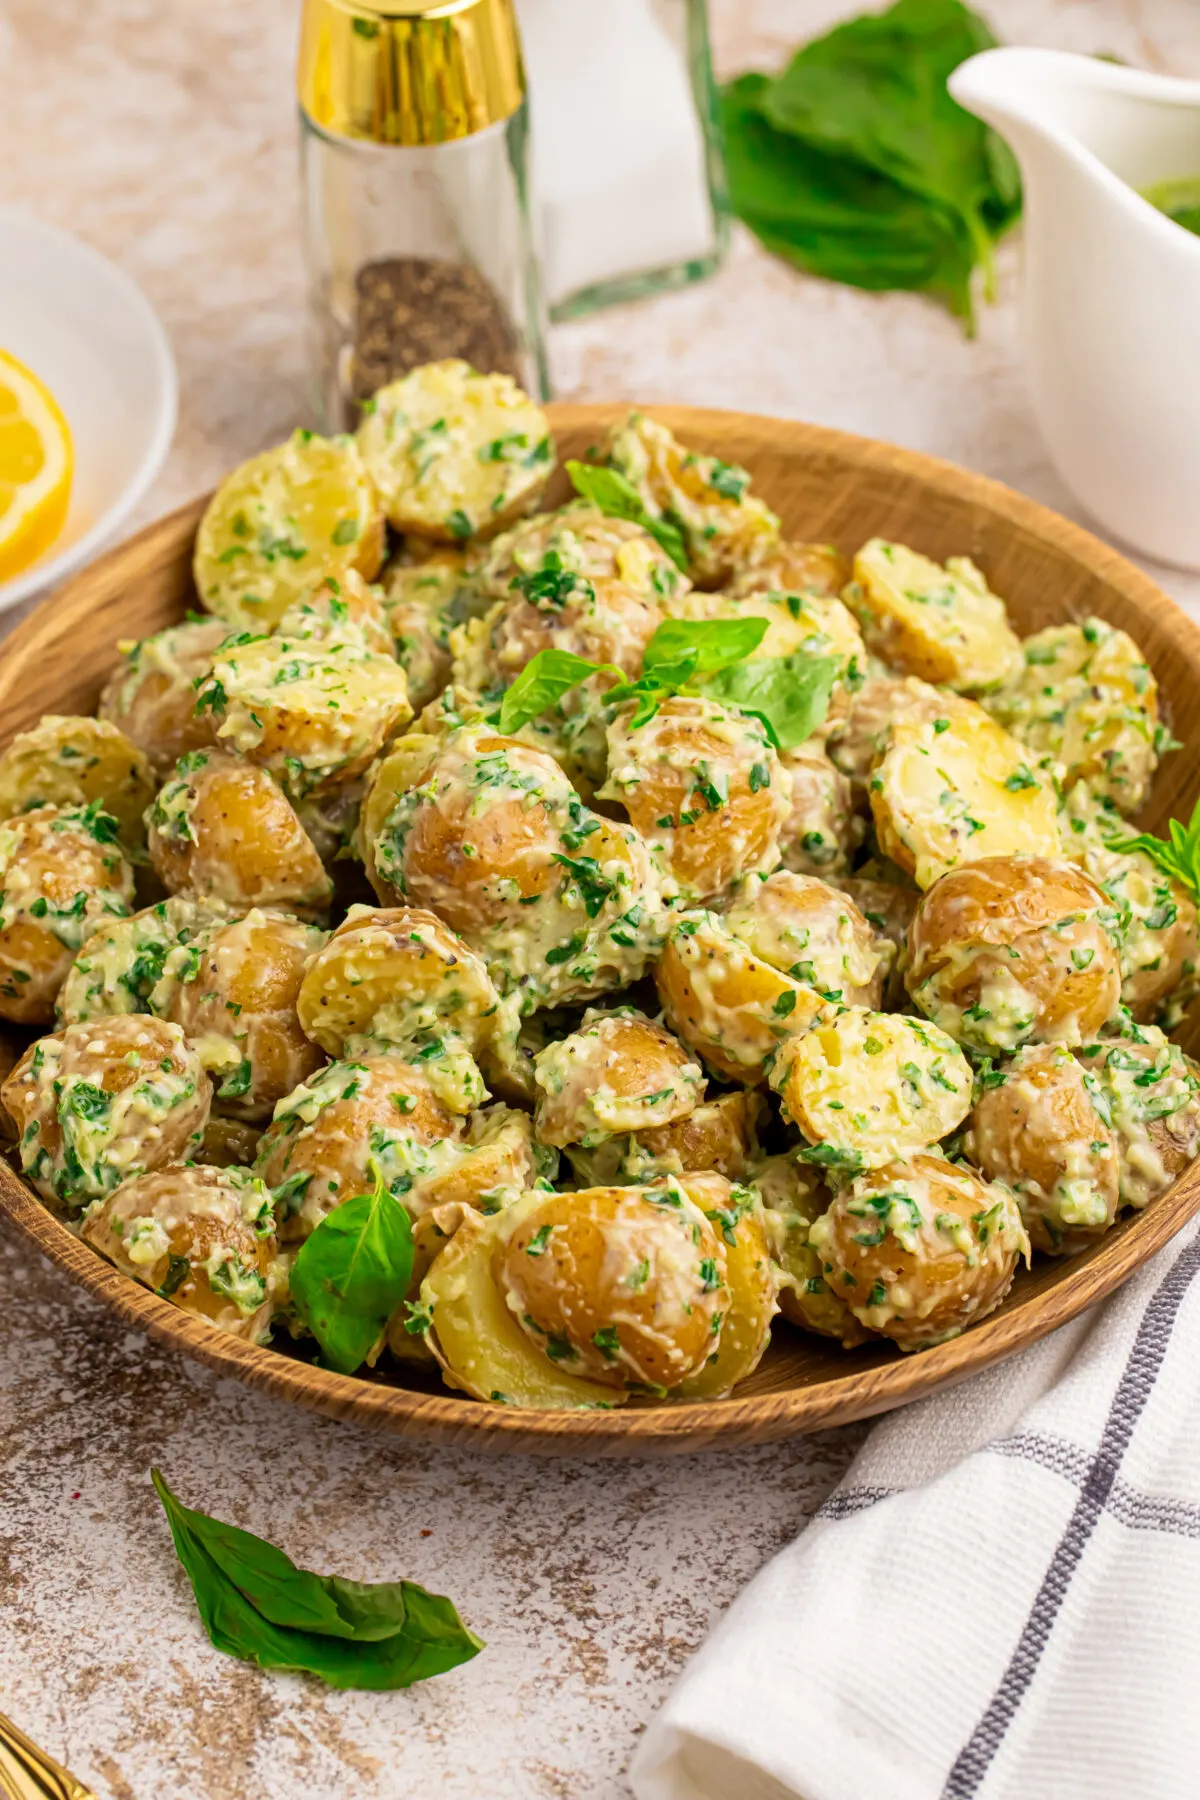 Whip up our Creamy Pesto Potato Salad for a fresh twist on a classic! Explore our easy recipe and make your next gathering unforgettable.